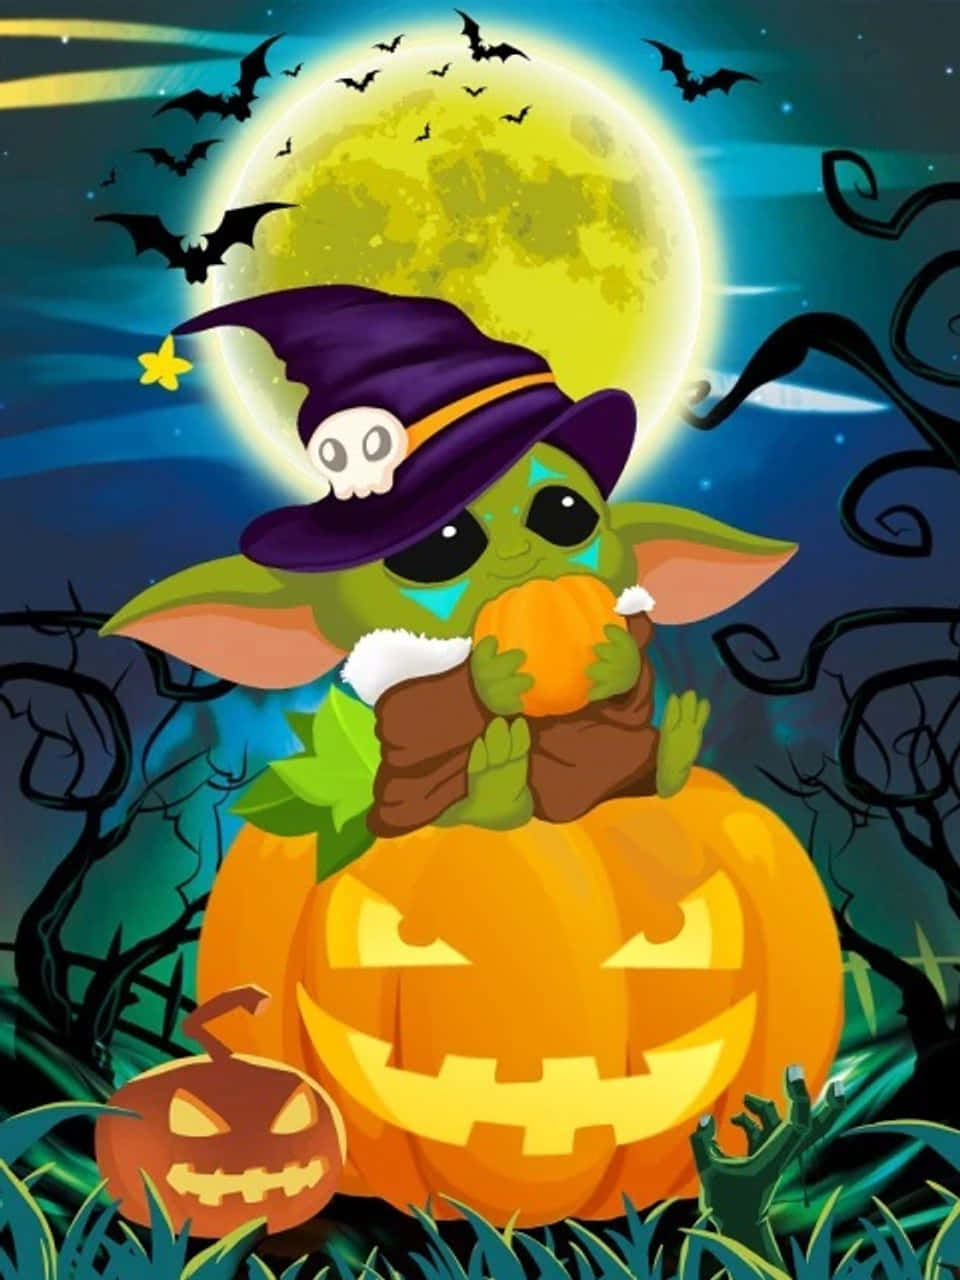 Celebrate Halloween with Stitch and Lilo! Wallpaper